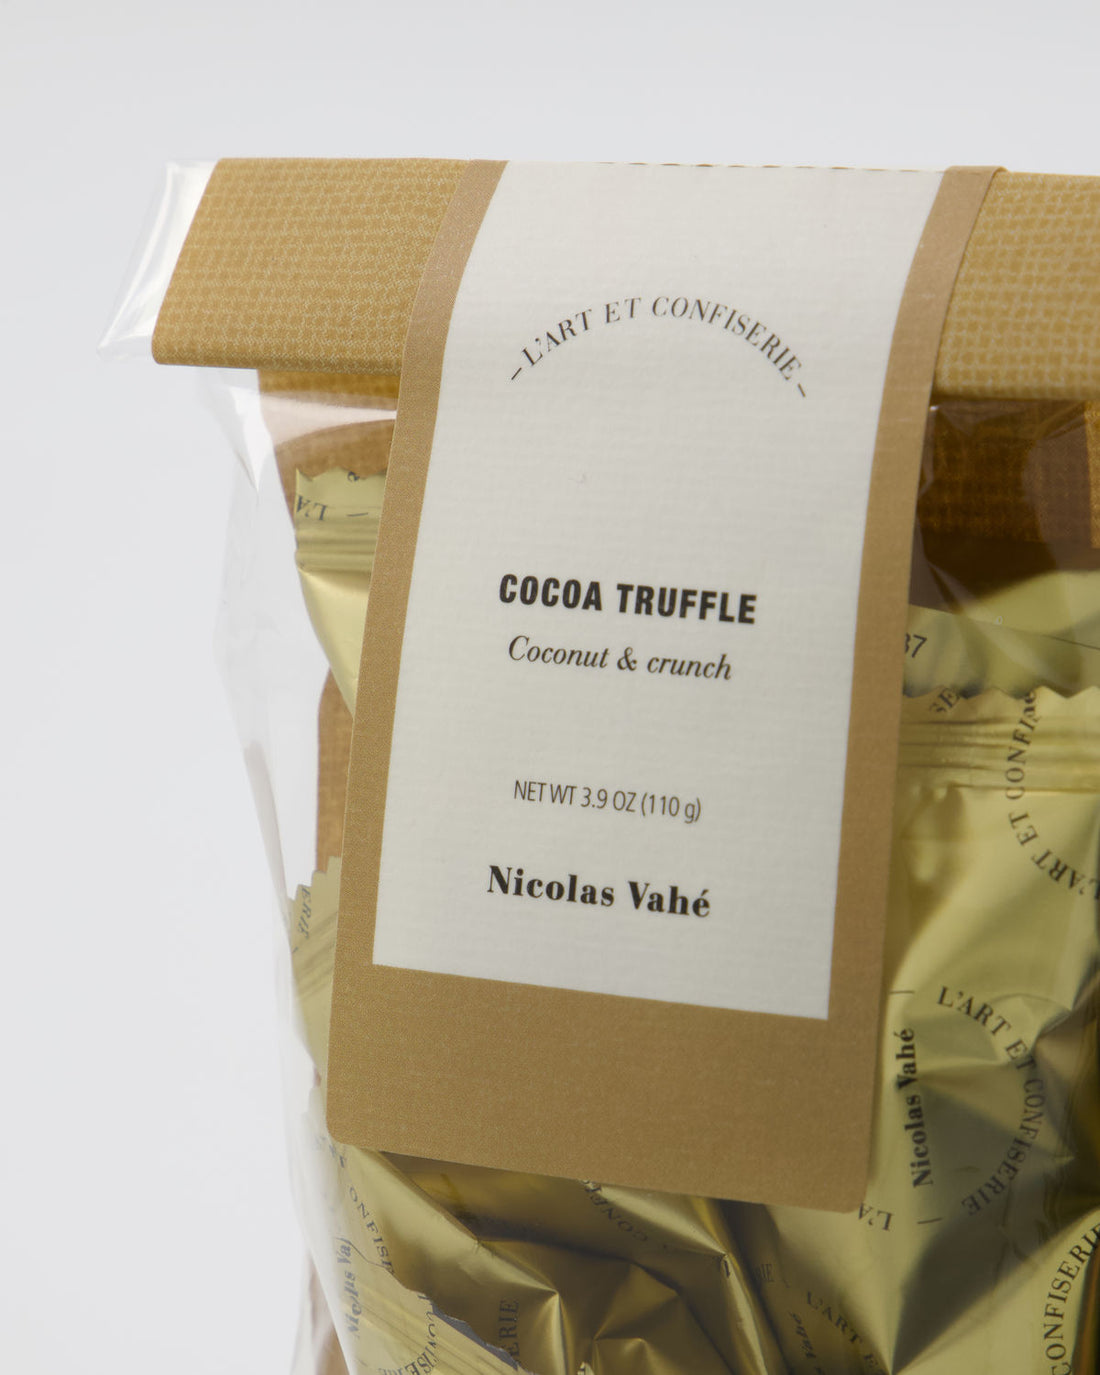 Nicolas Vahé - Cocoa truffle with coconut and crunch